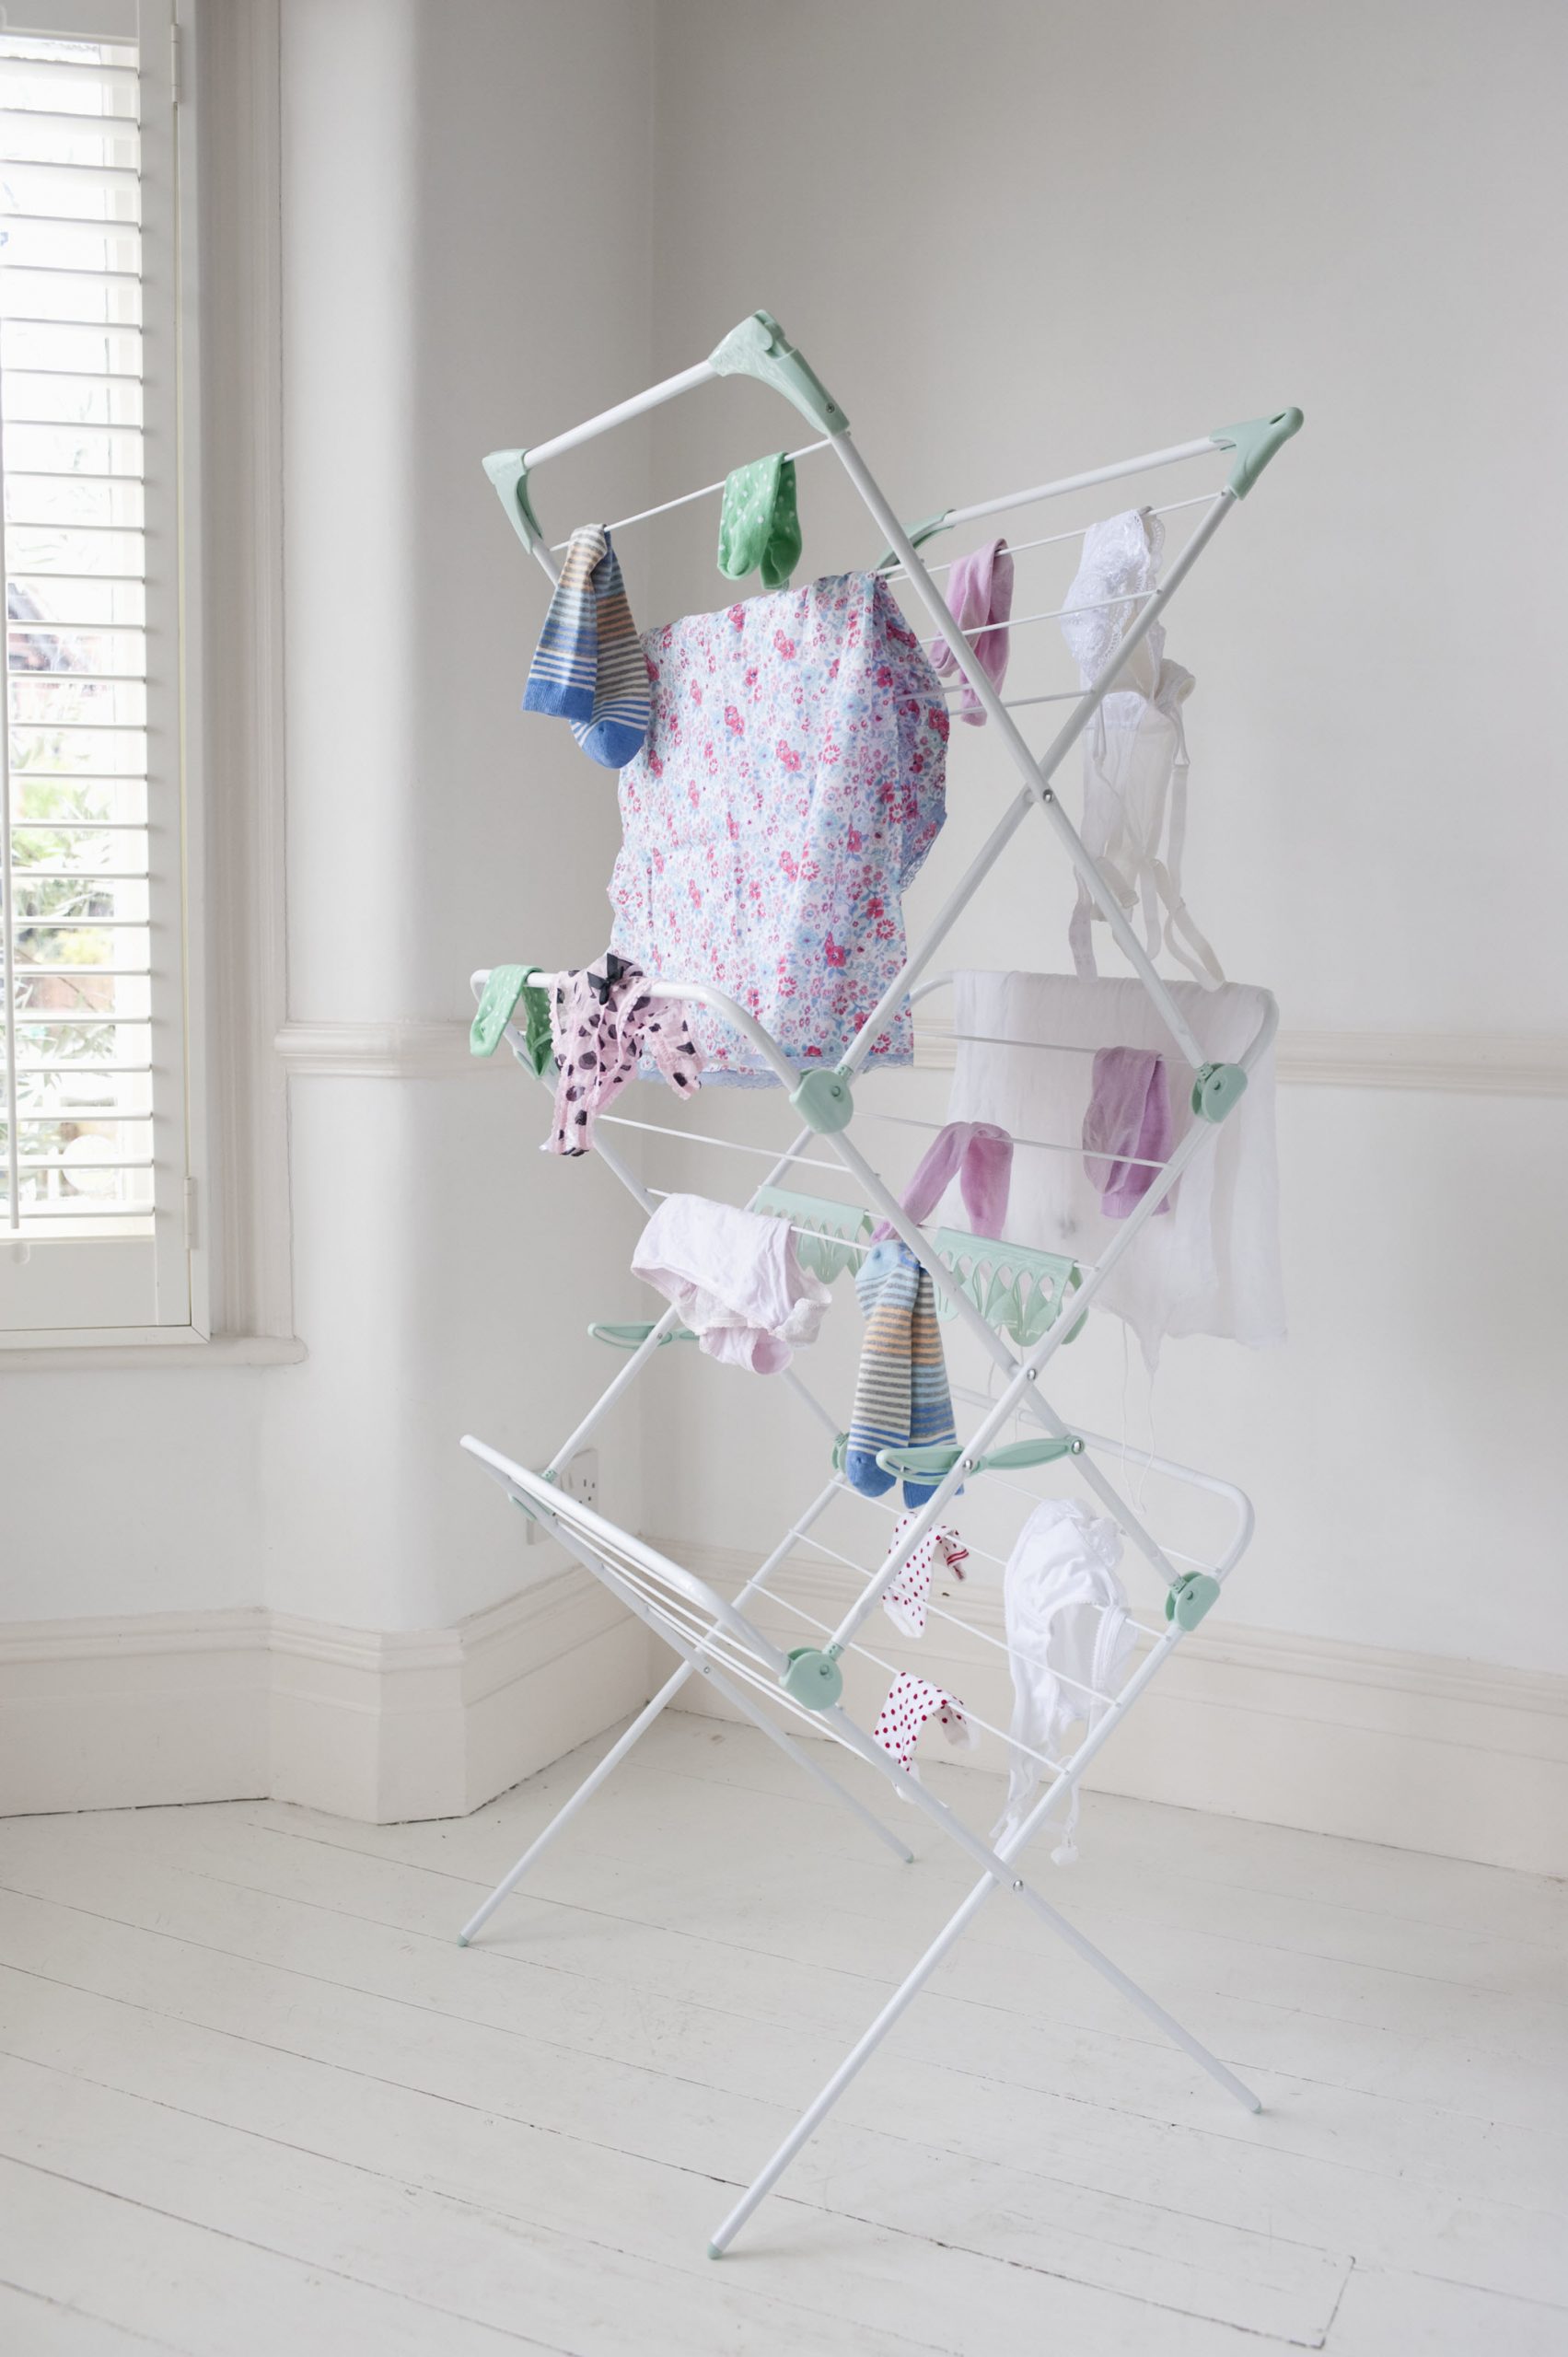 Clothes on laundry airer